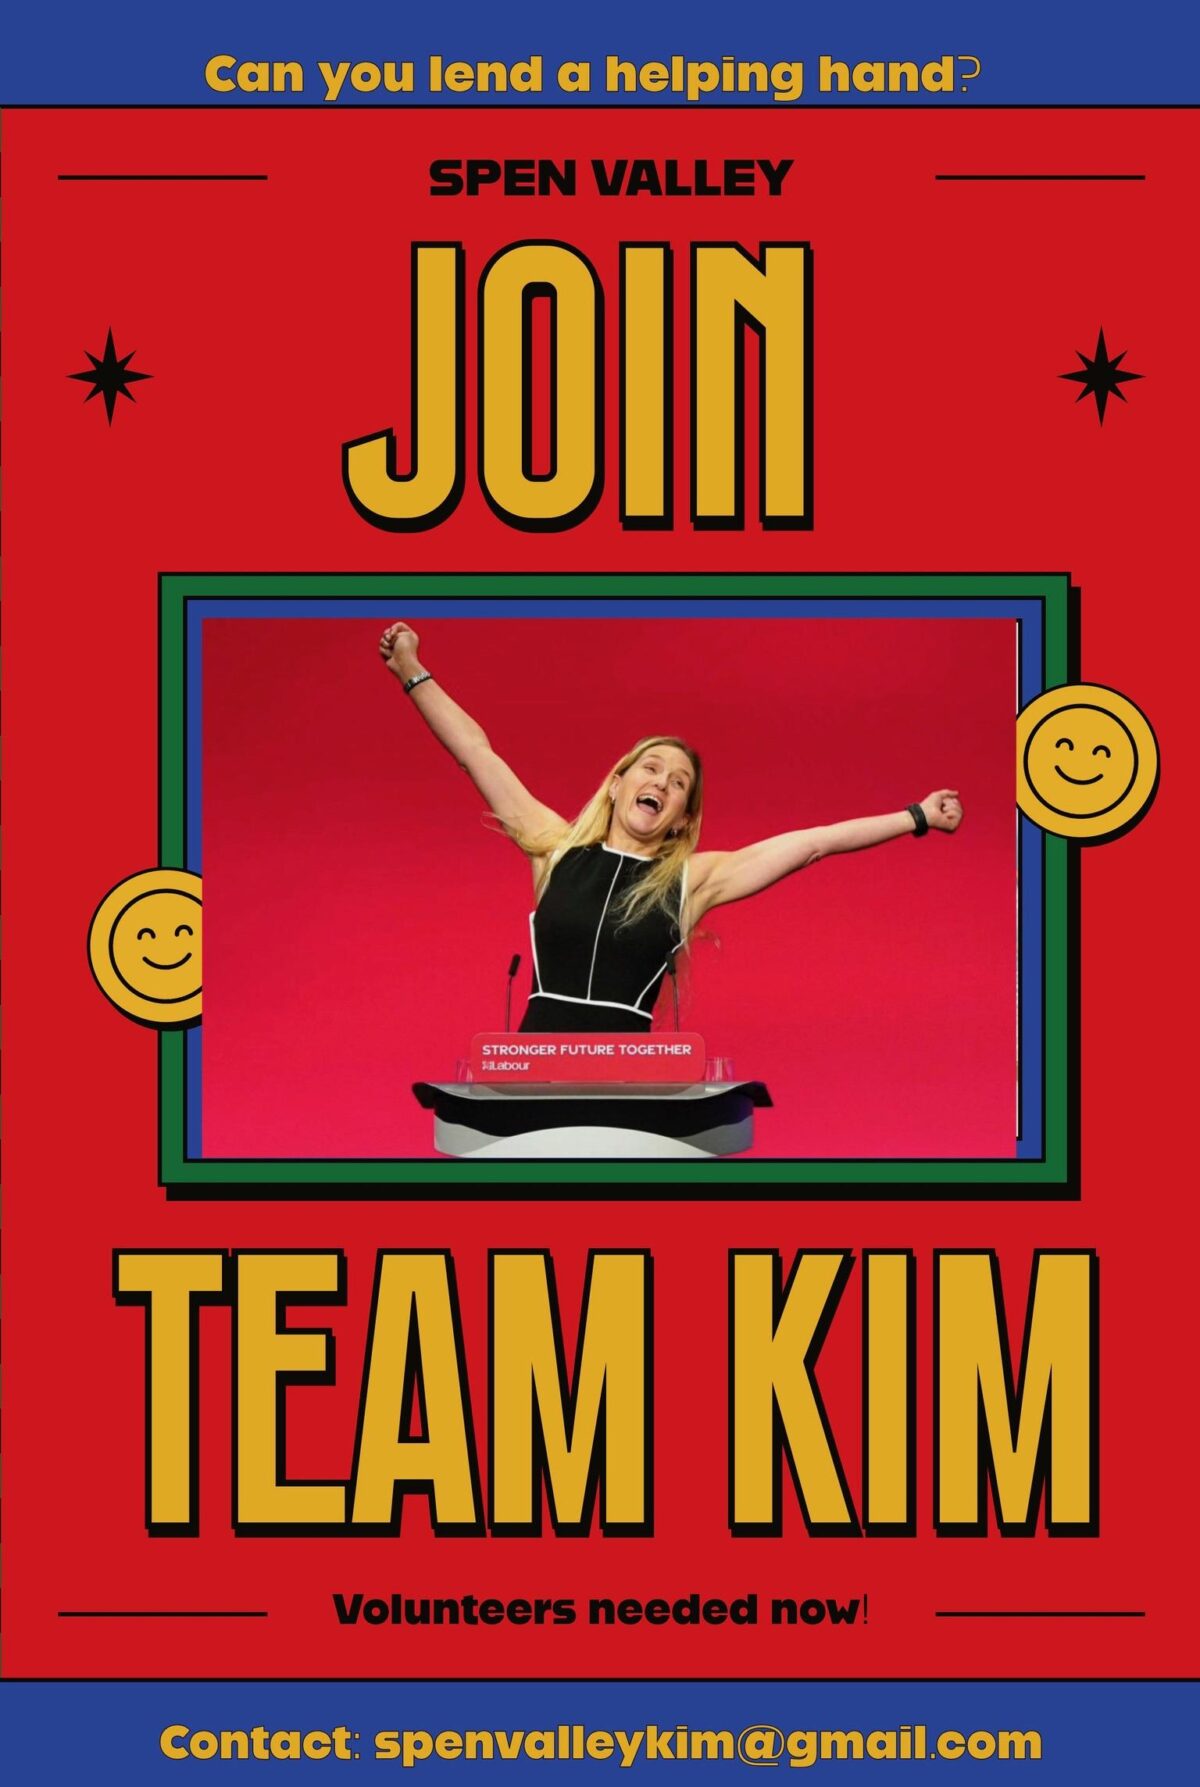 Join Team Kim campaign details